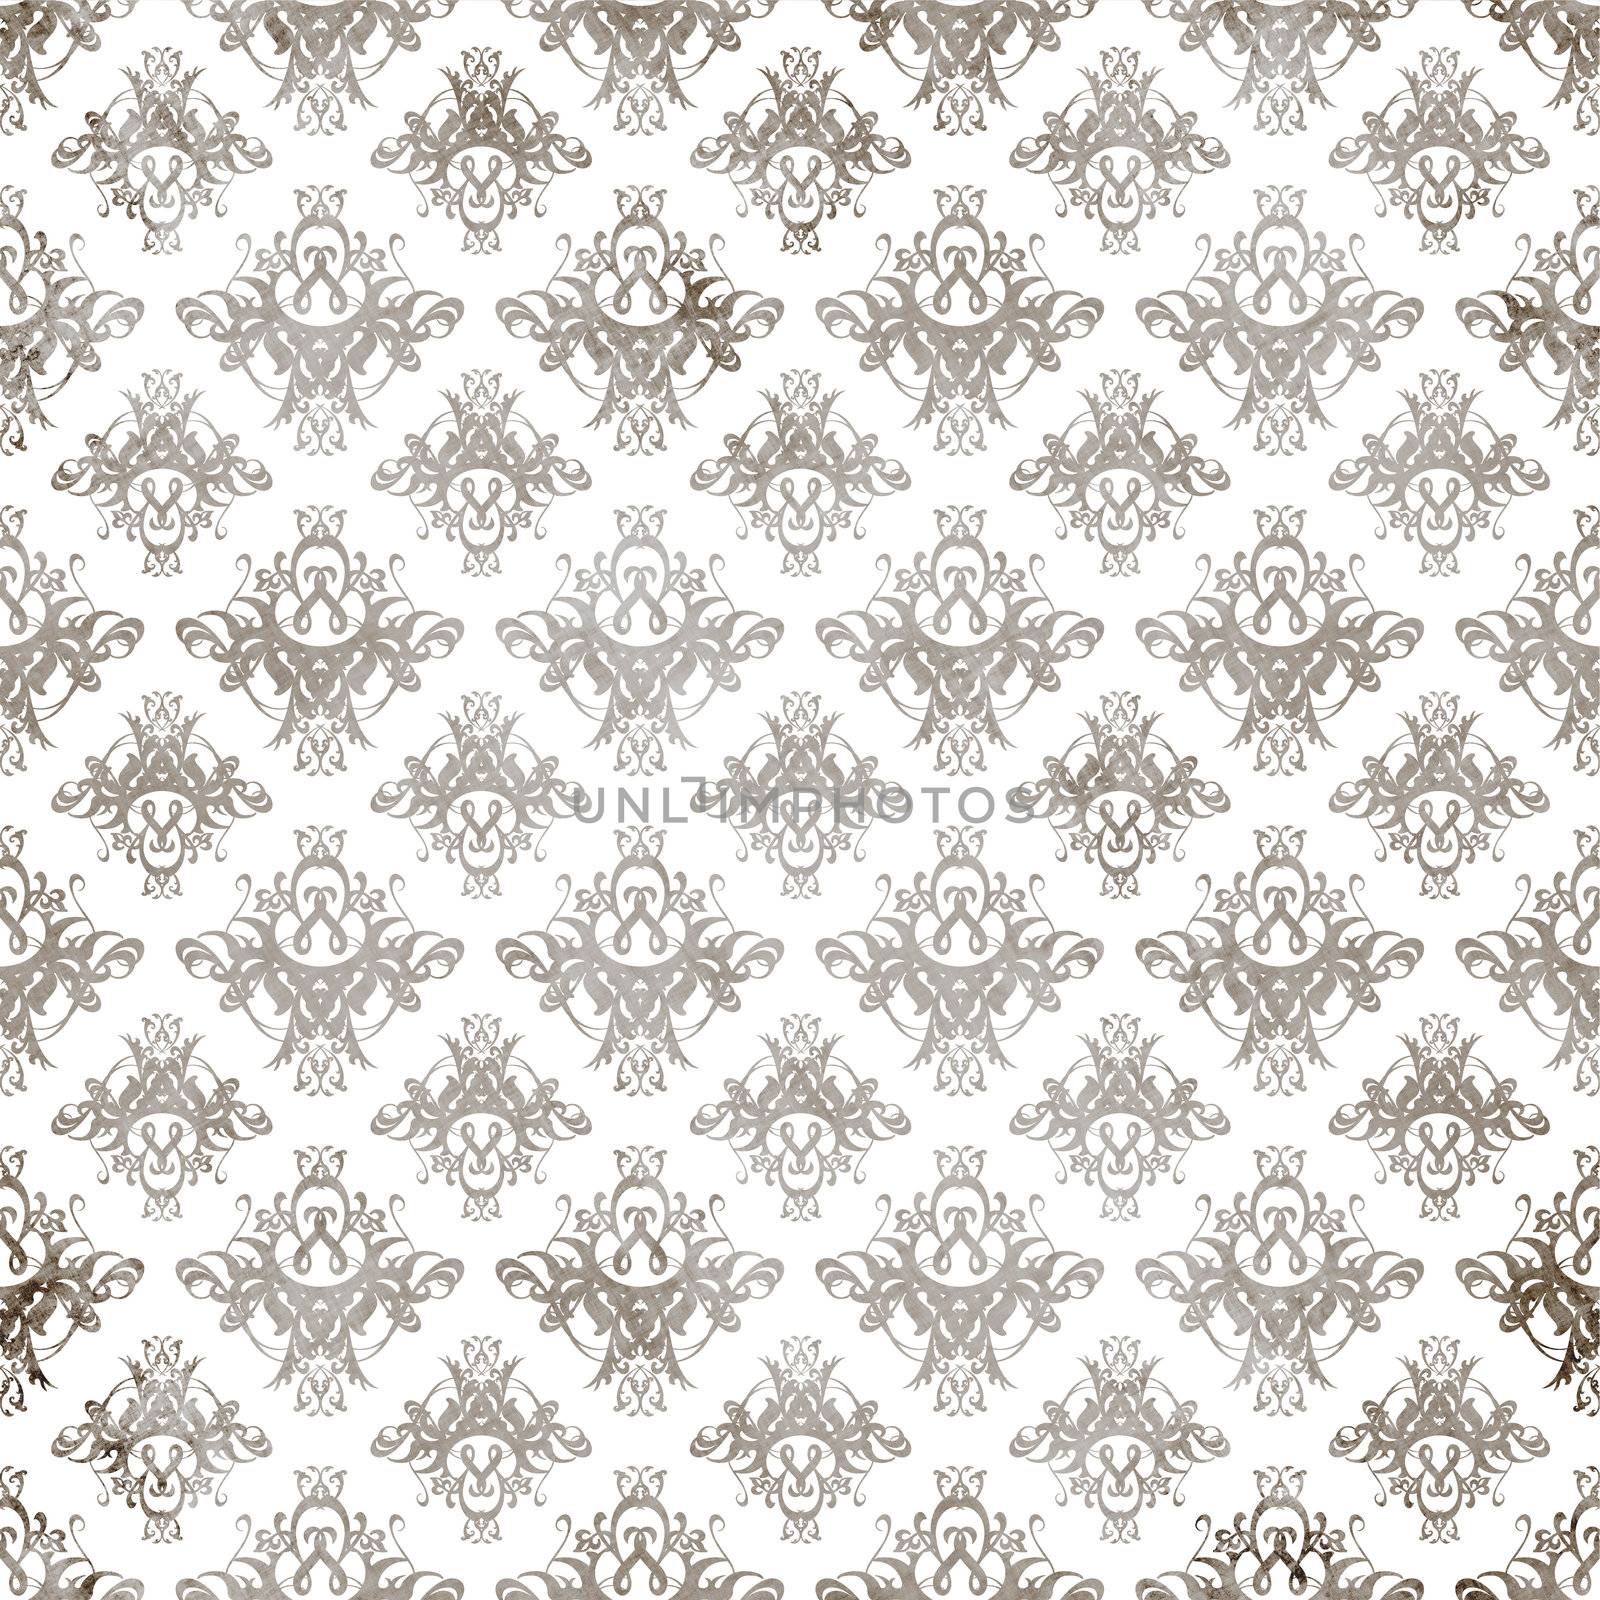 Illustration of a seamless damask pattern or texture in black and white